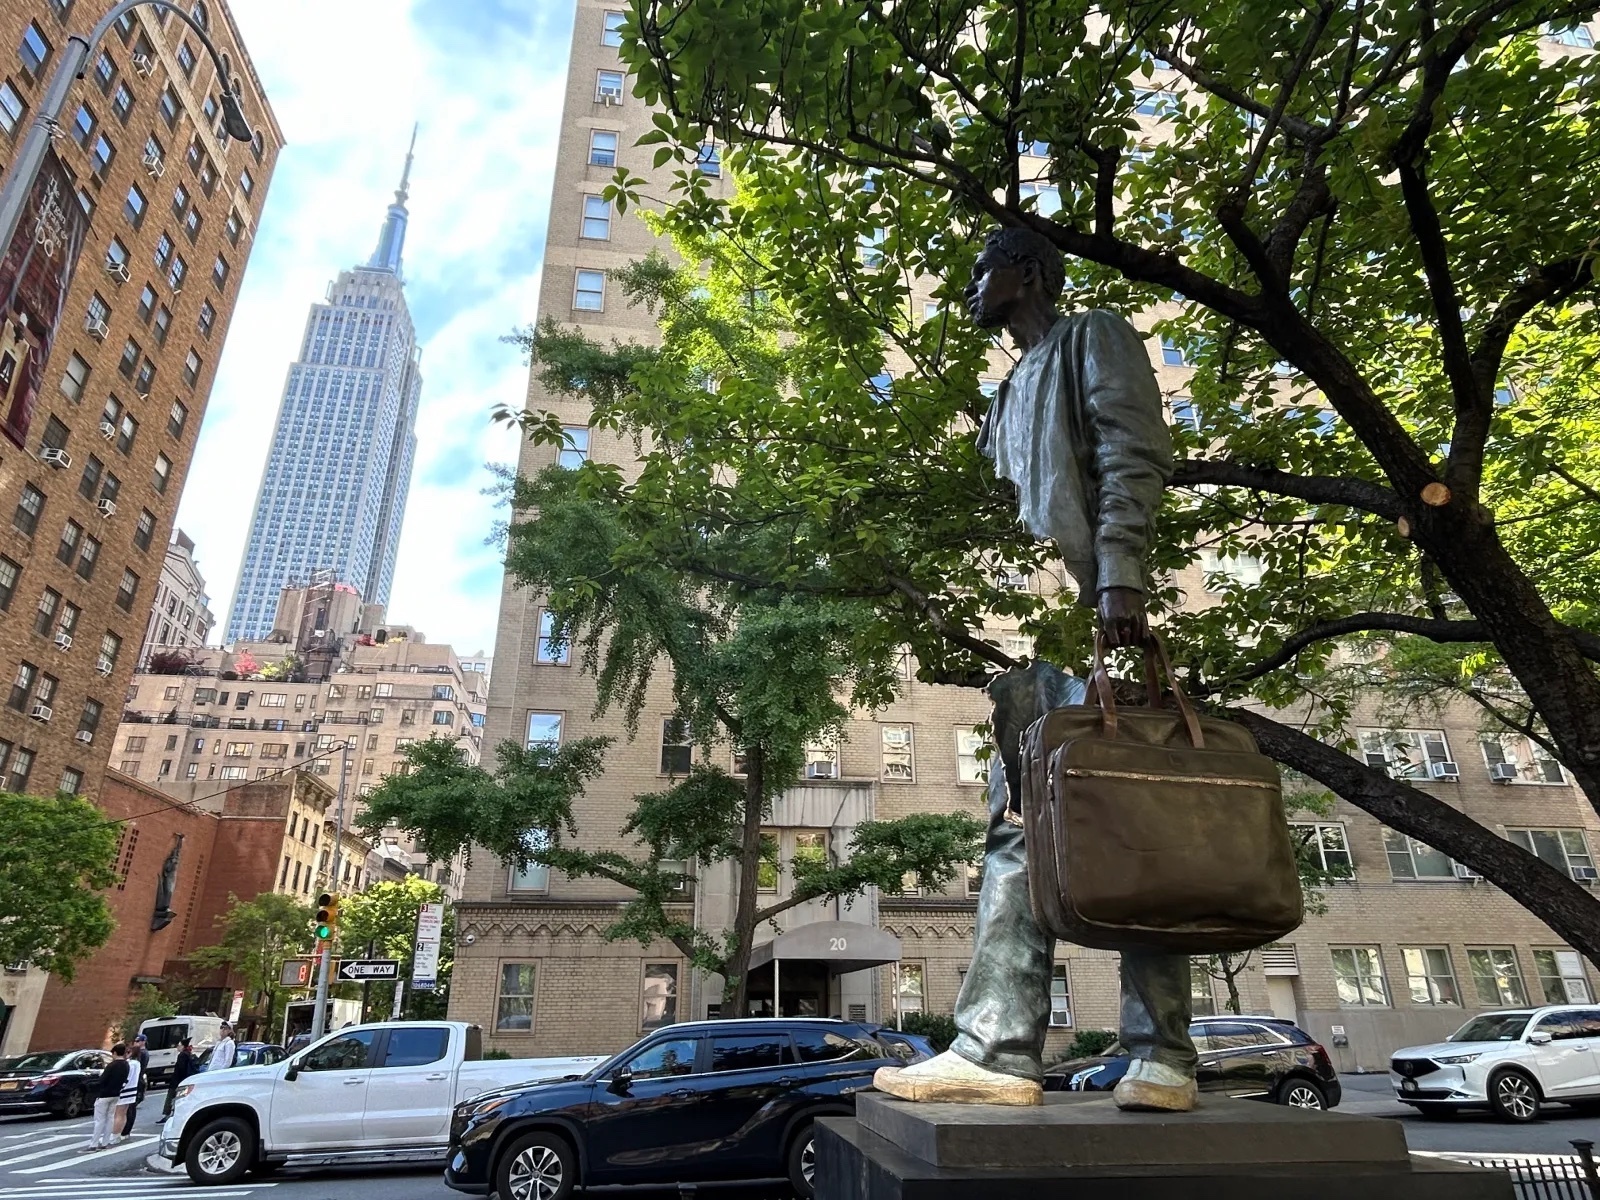 An illusion sculpture of a man with the Empire State Building in the background.